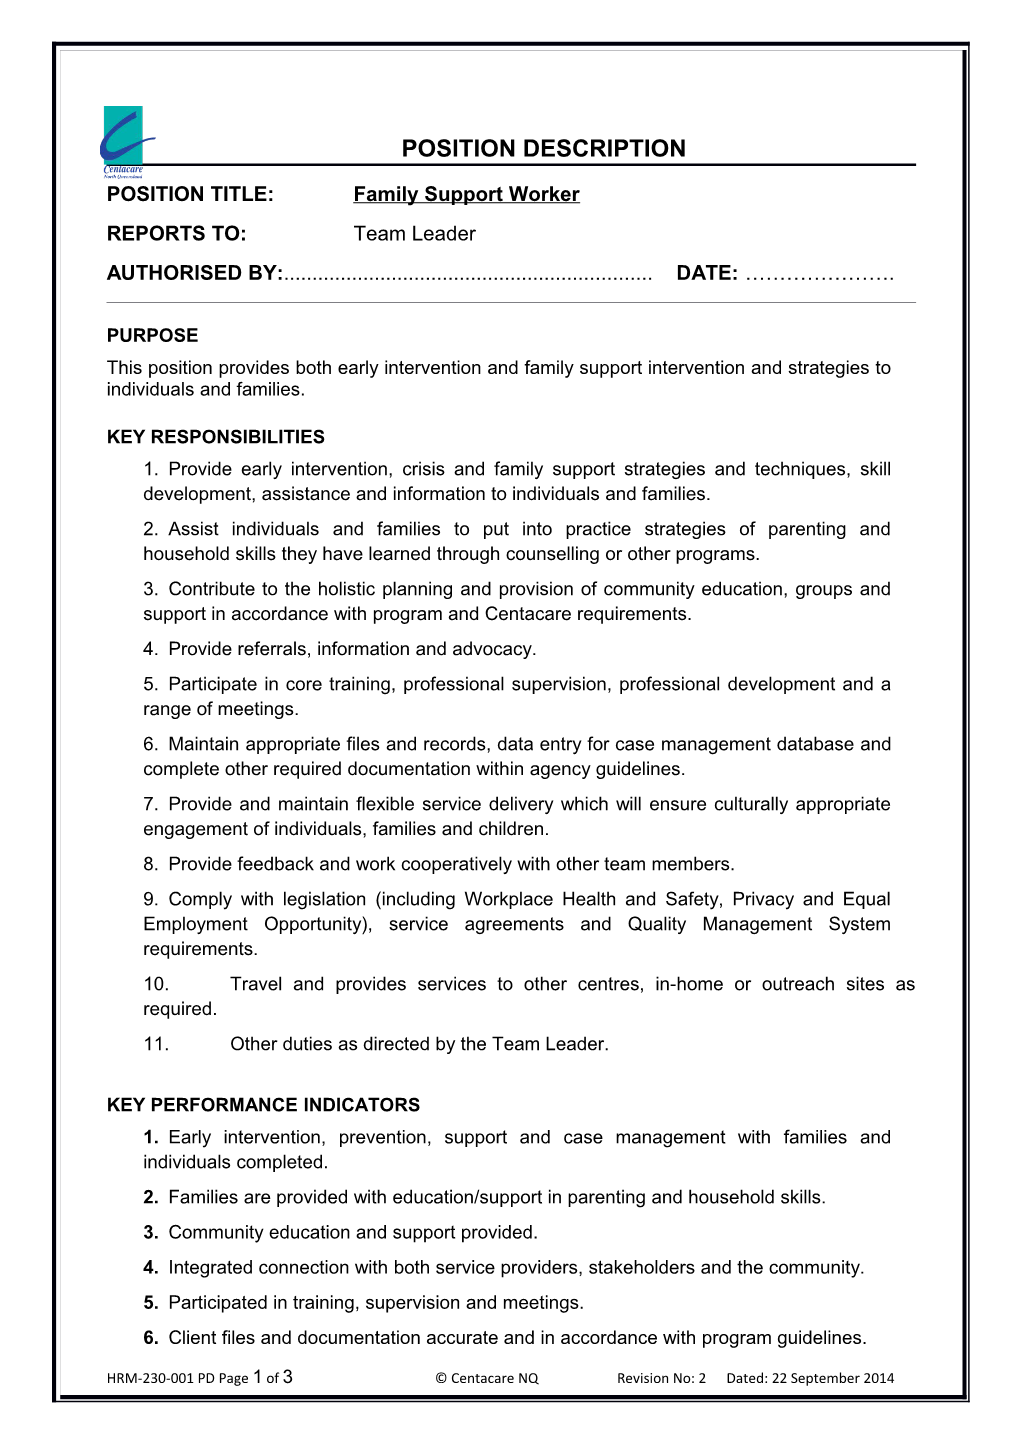 POSITION TITLE: Family Support Worker